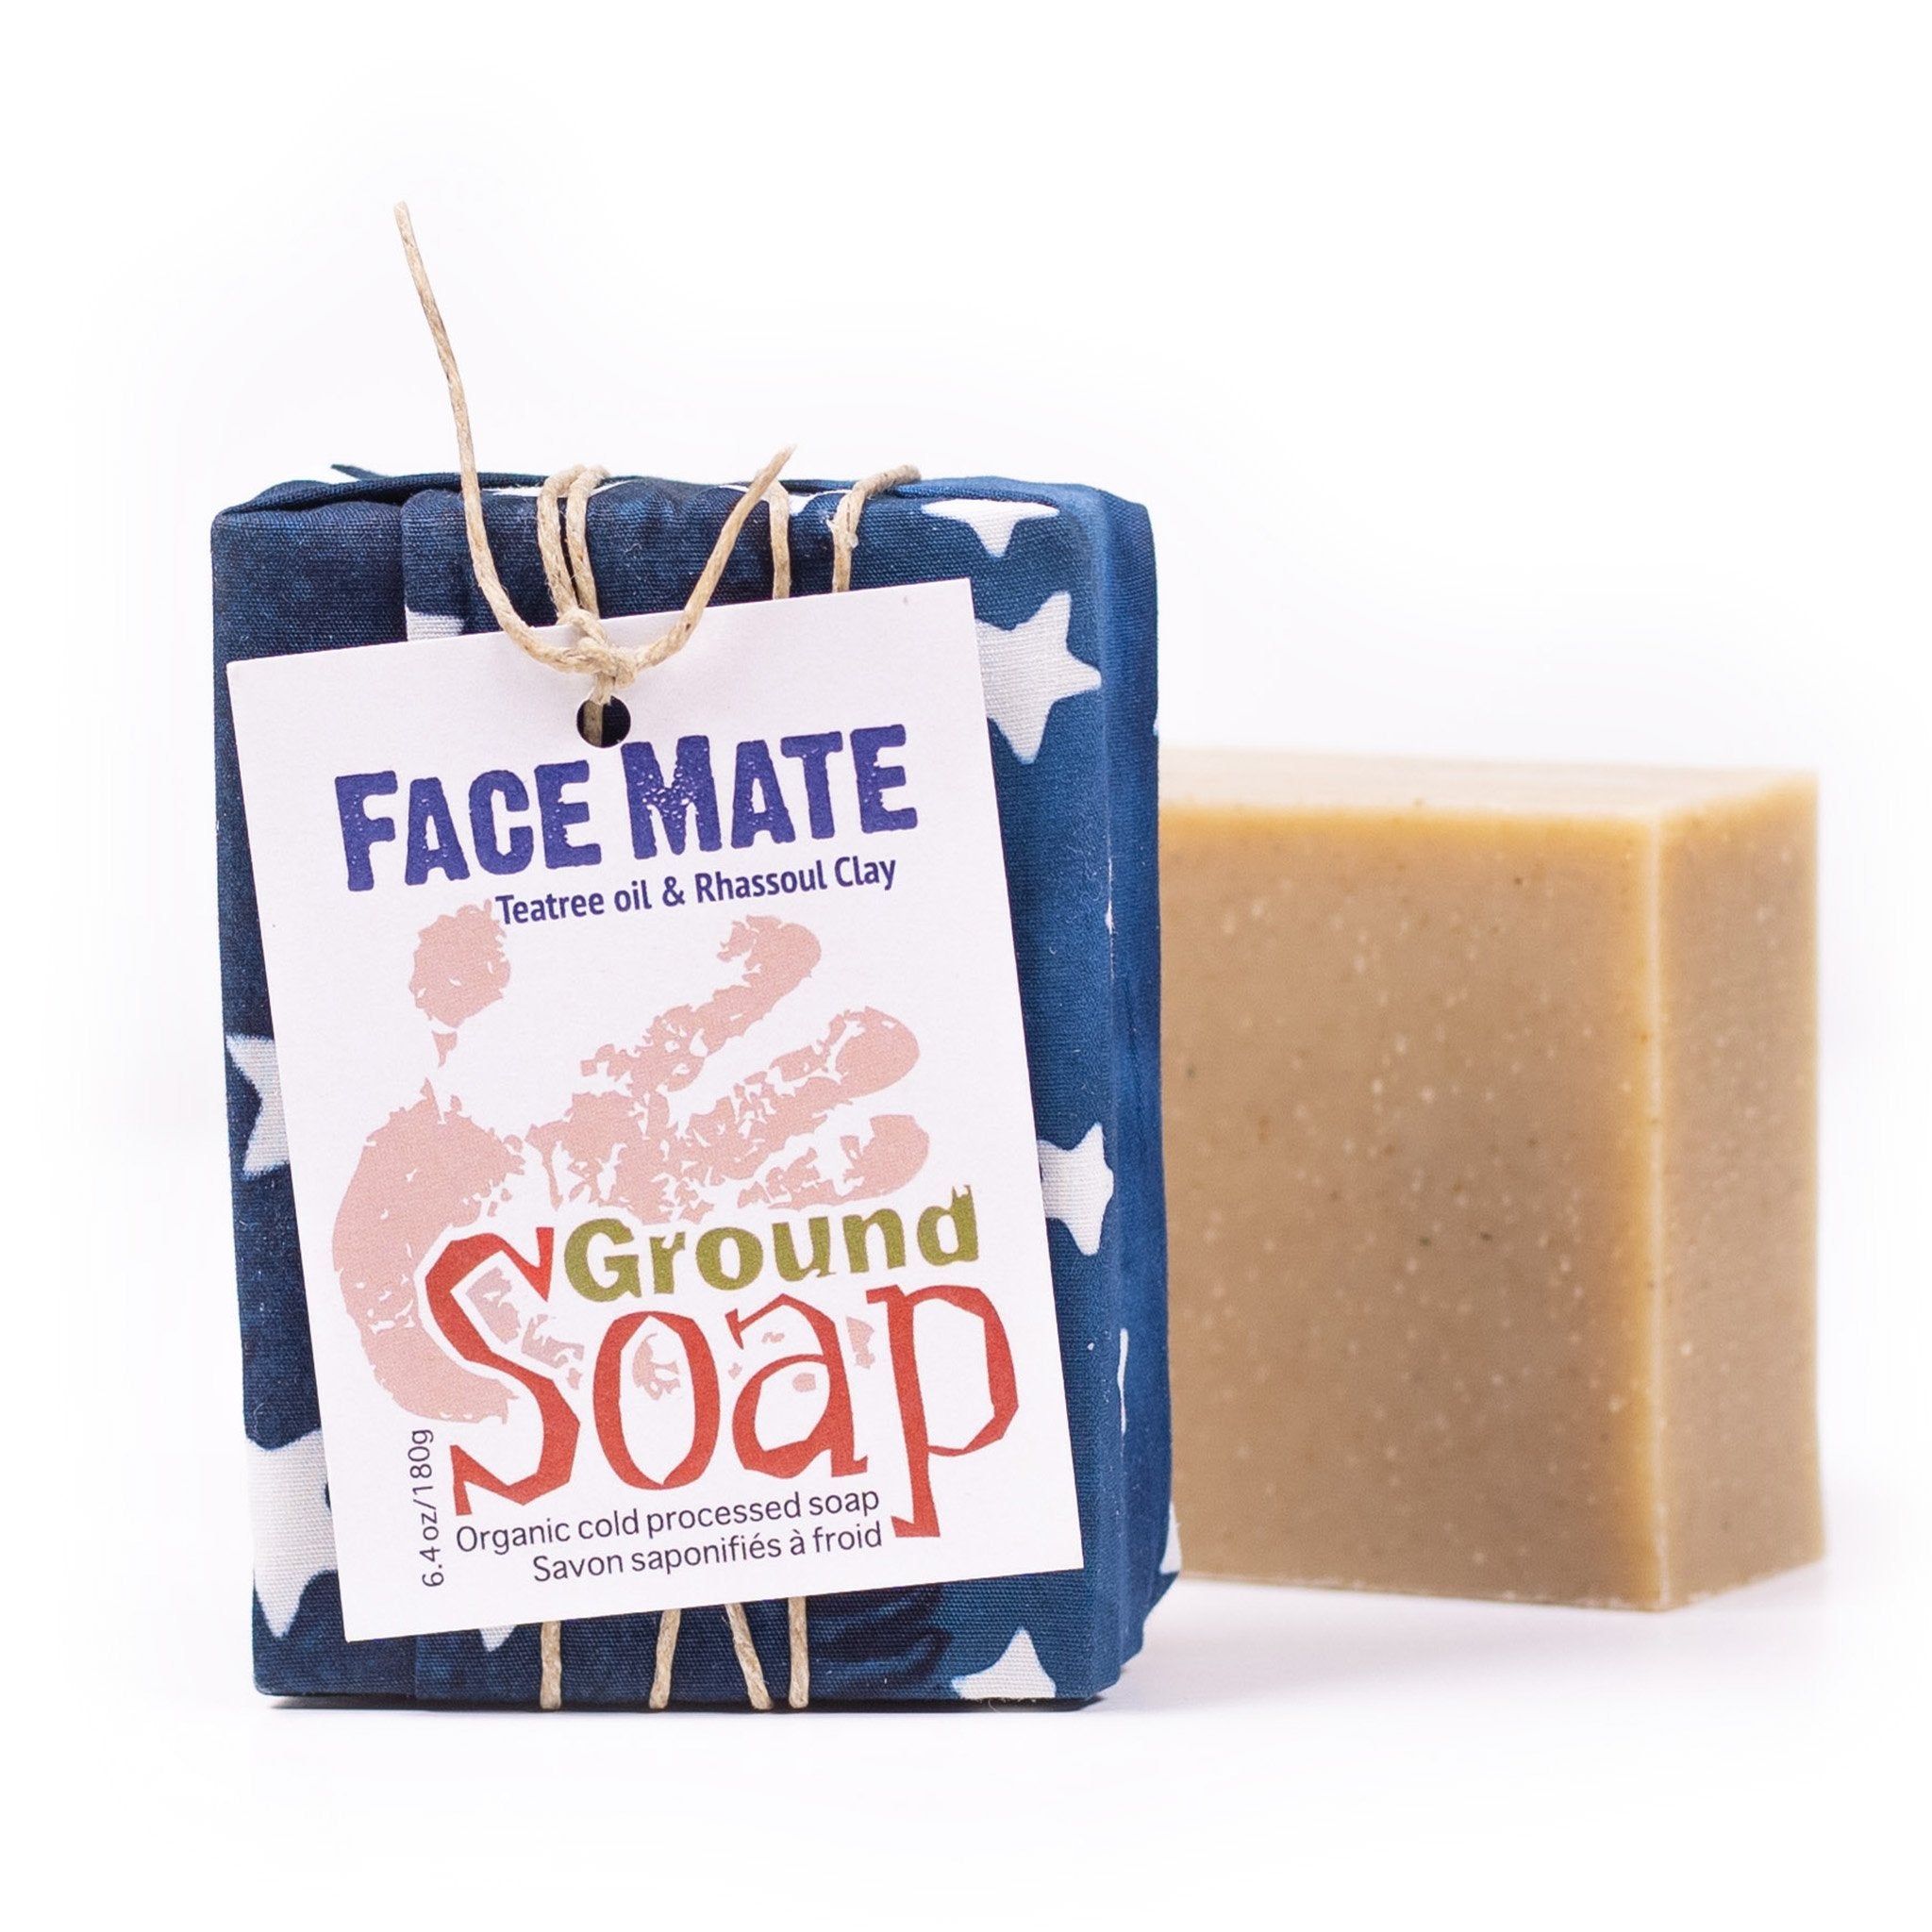 Ground Soap - Face Mate (Formerly Medicine Man)